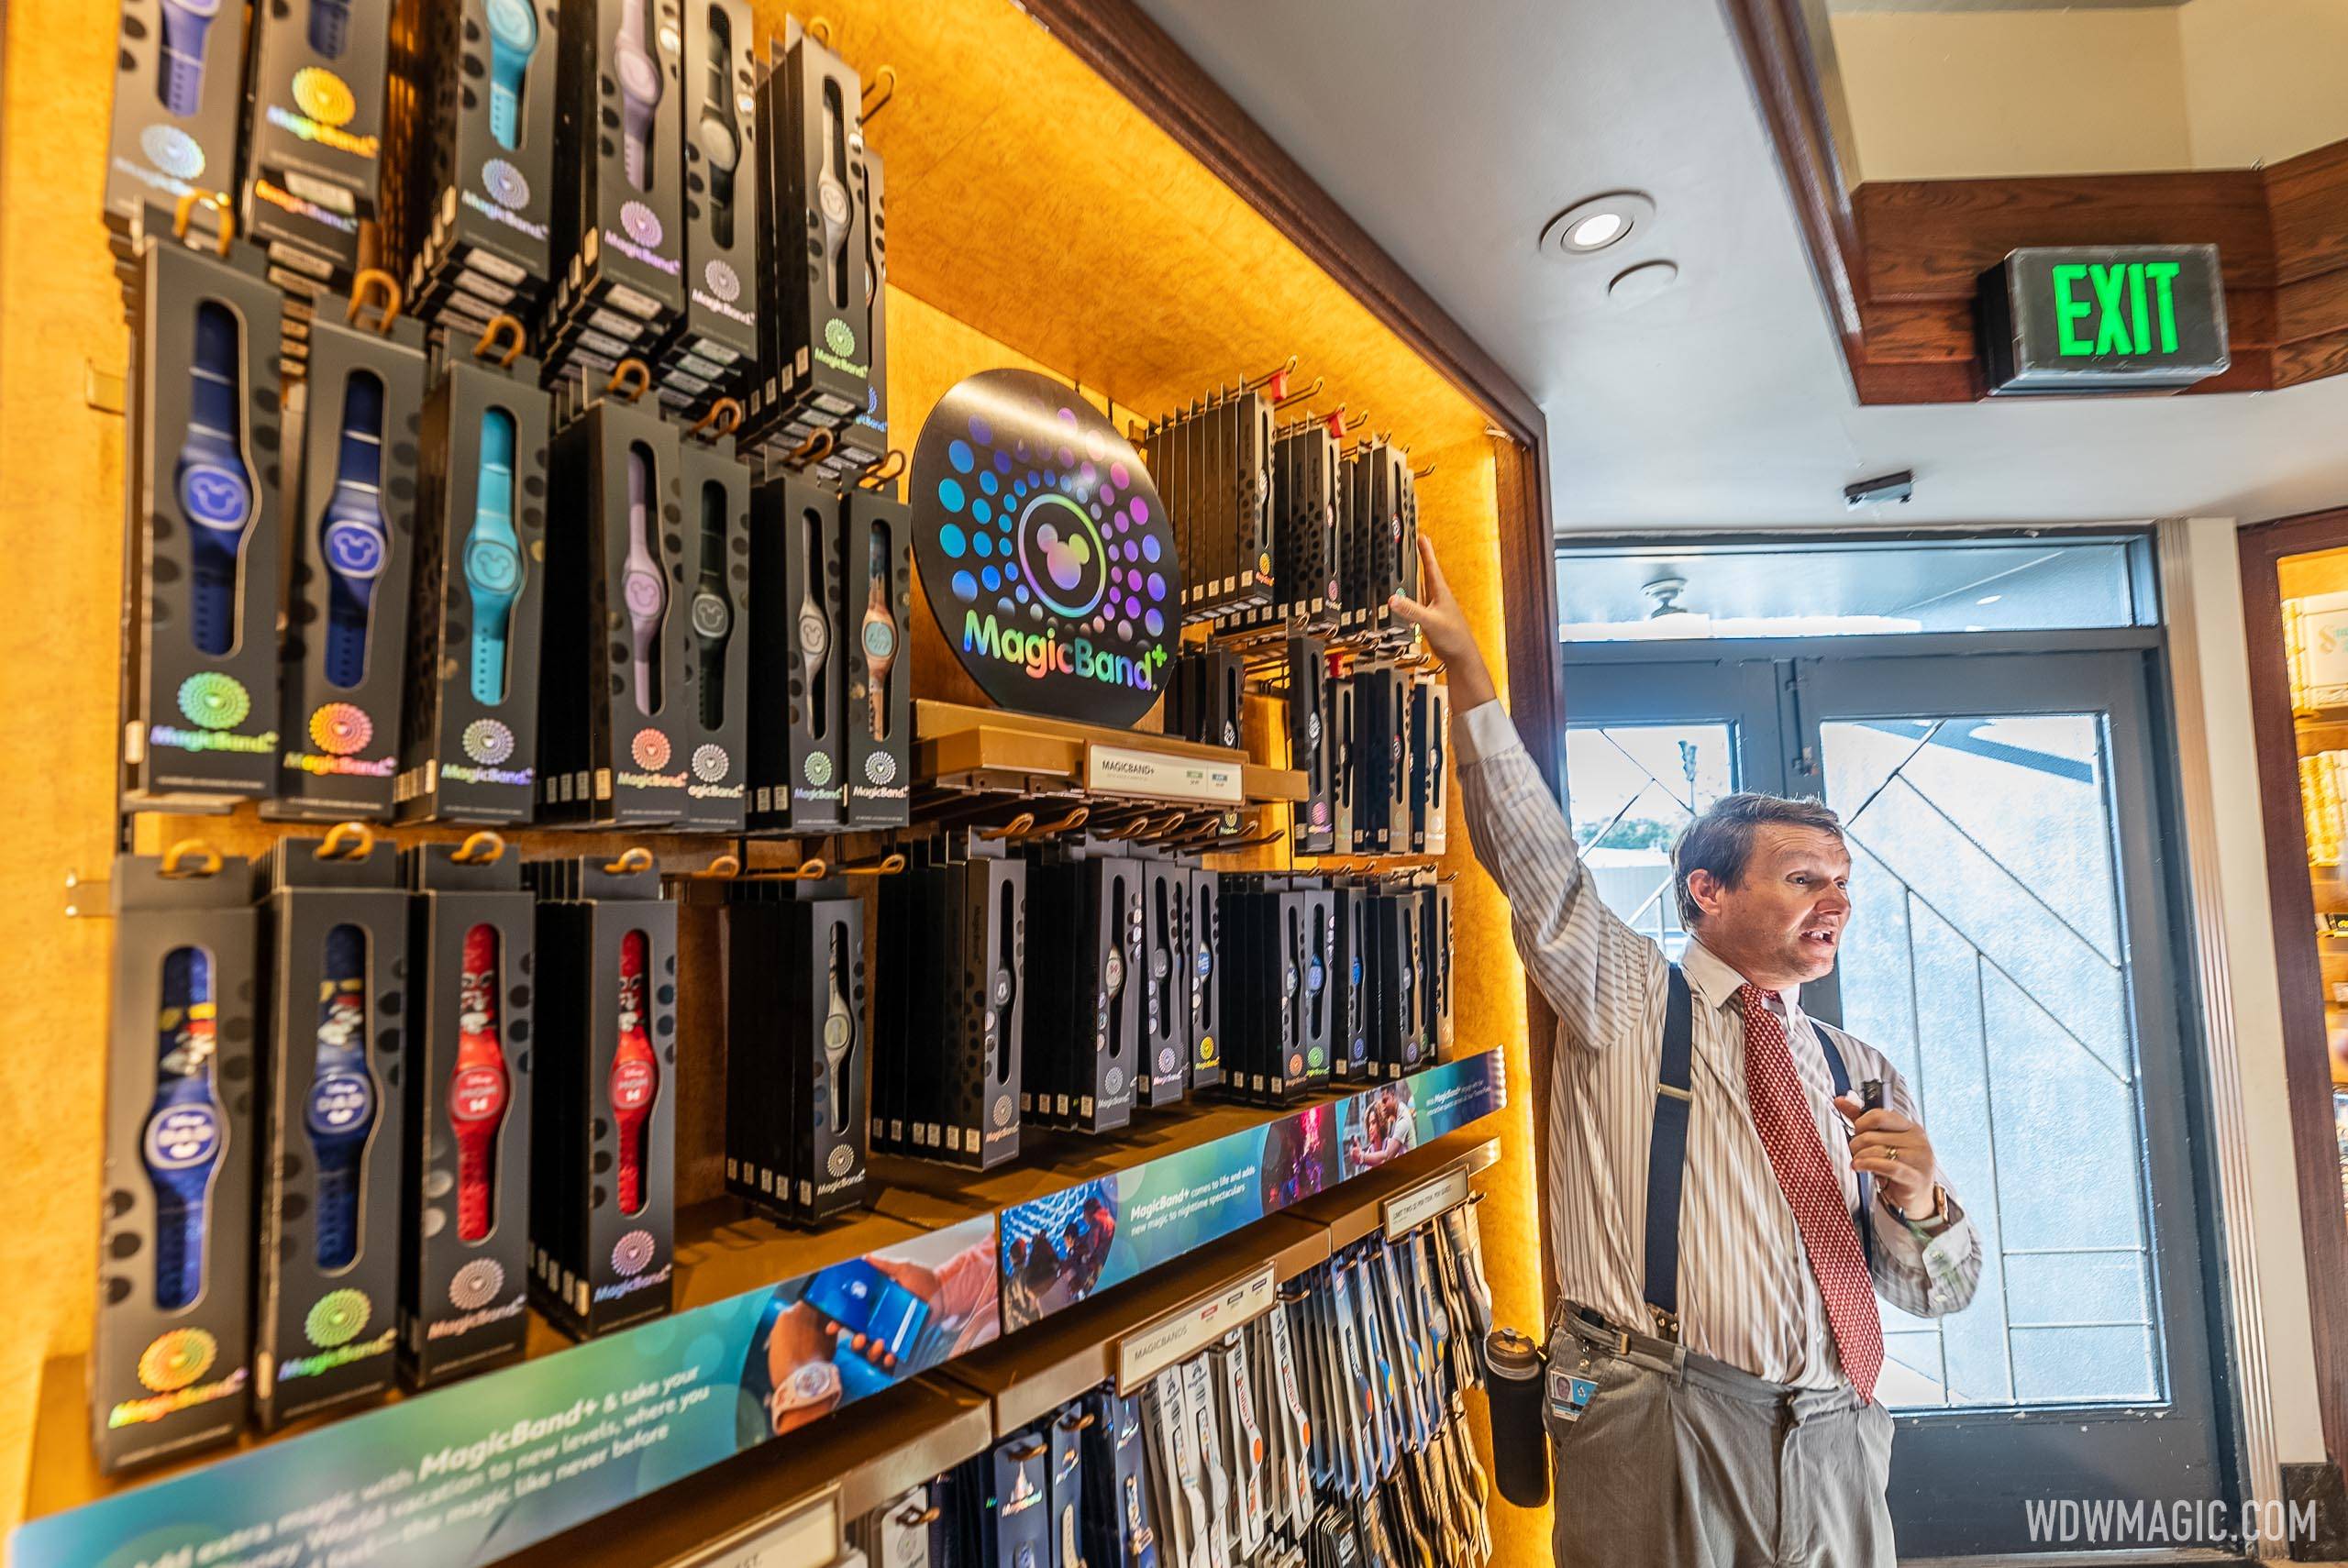 MagicBand+ is available in stores at Walt Disney World in limited quantities